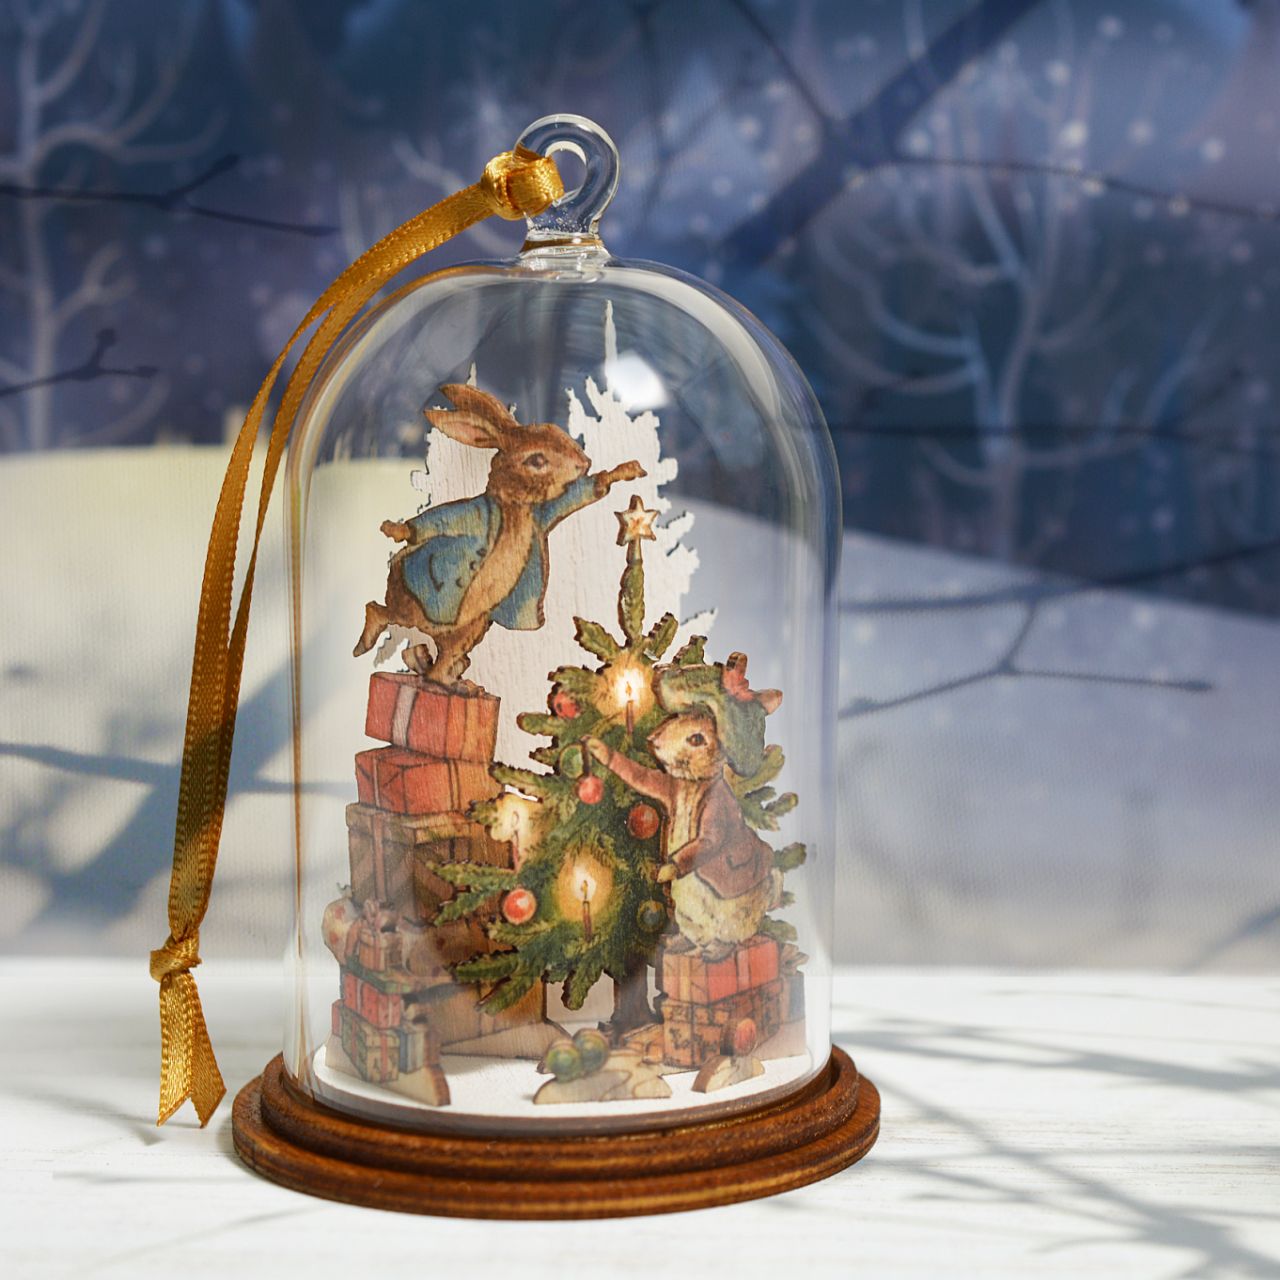 Peter Rabbit and Benjamin Bunny Christmas Wooden Hanging Ornament  This festive Peter Rabbit and Benjamin Bunny wooden hanging ornament has been intricately created and comes encased in a beautiful eco-friendly glass dome. This classic vintage style helps bring to life the original illustrations from the Beatrix Potter stories.